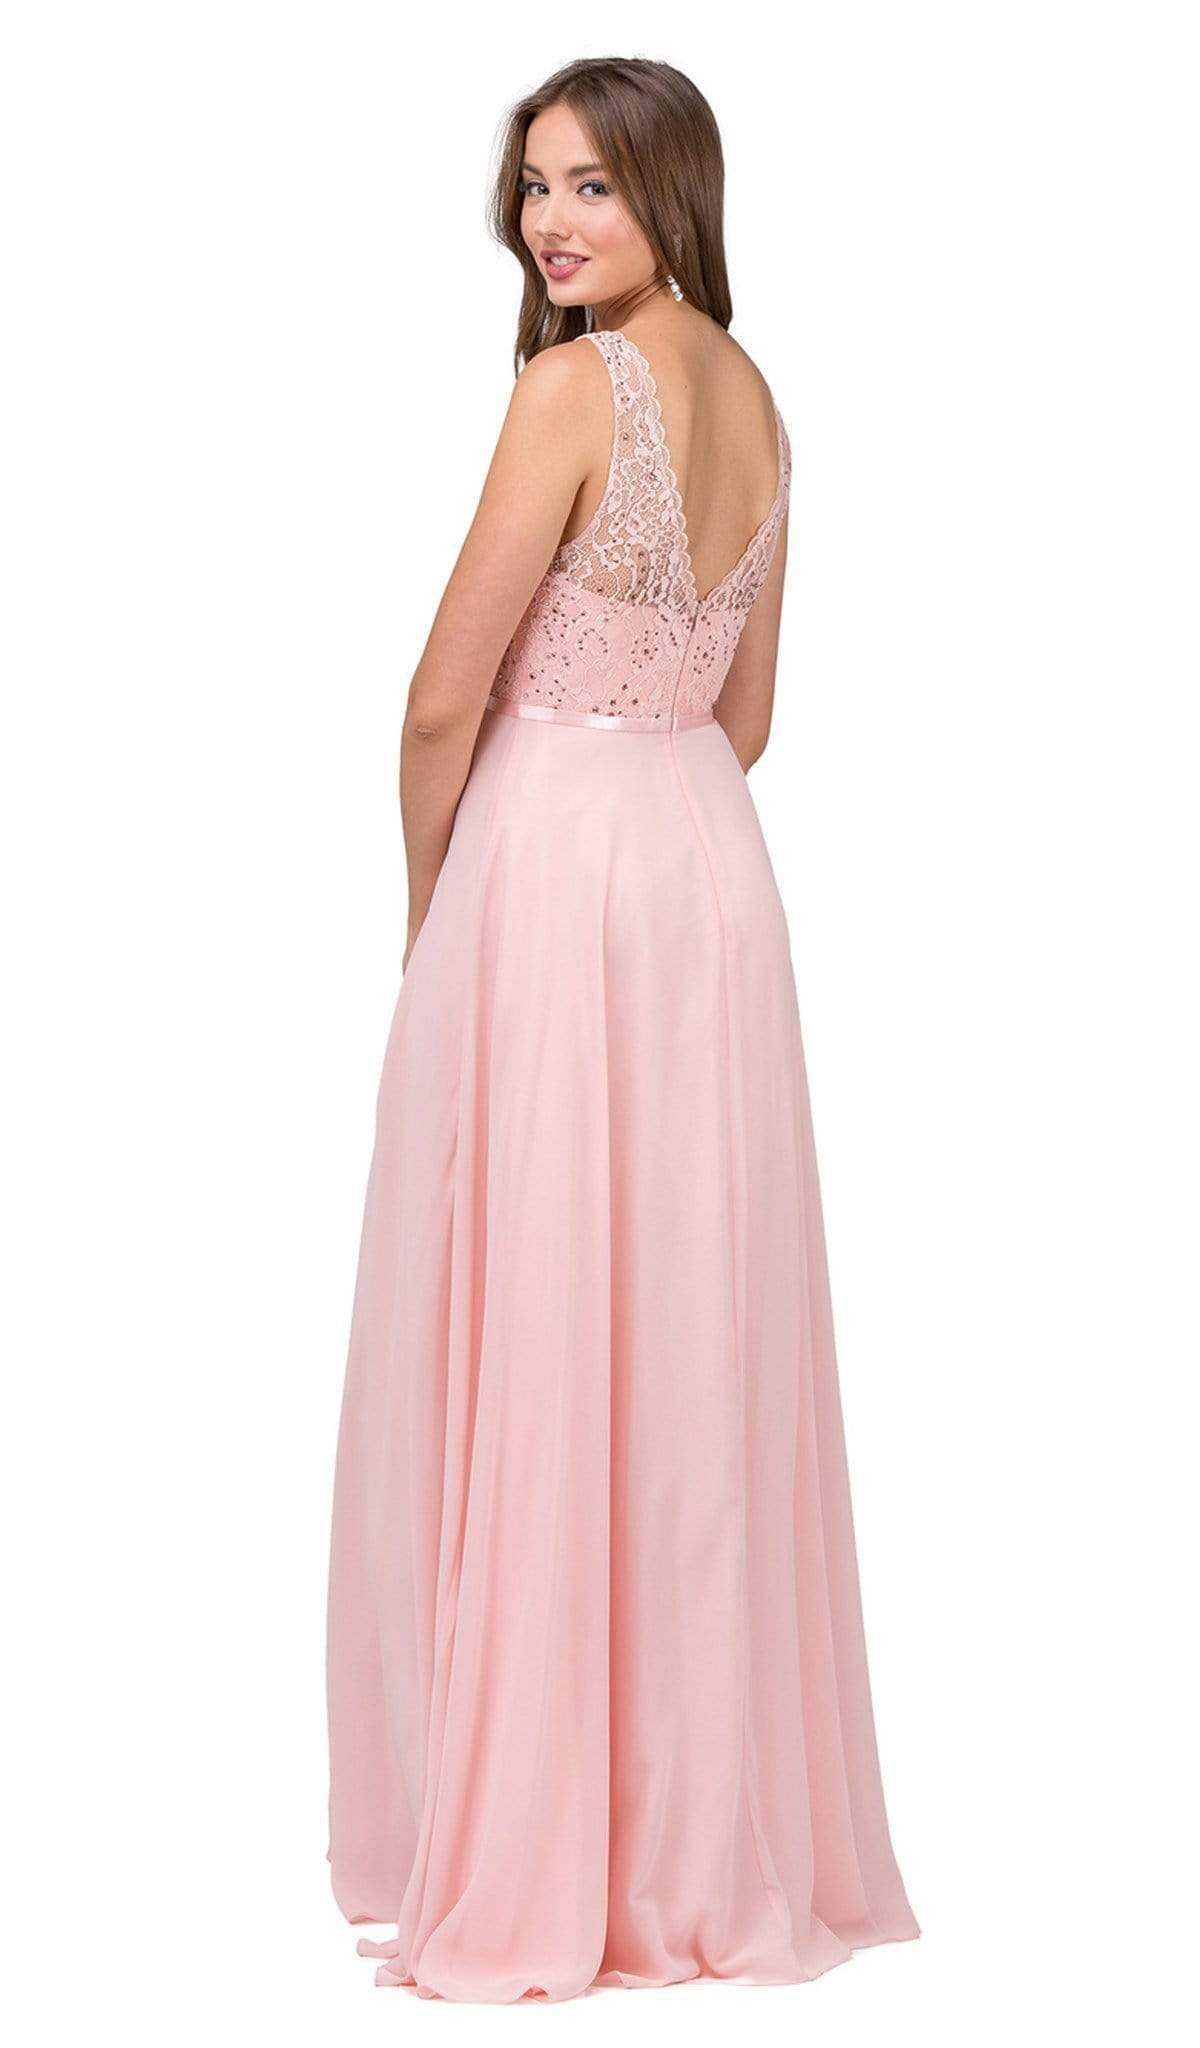 Dancing Queen, Dancing Queen - 2267 Sleeveless Scalloped Lace Illusion Prom Gown